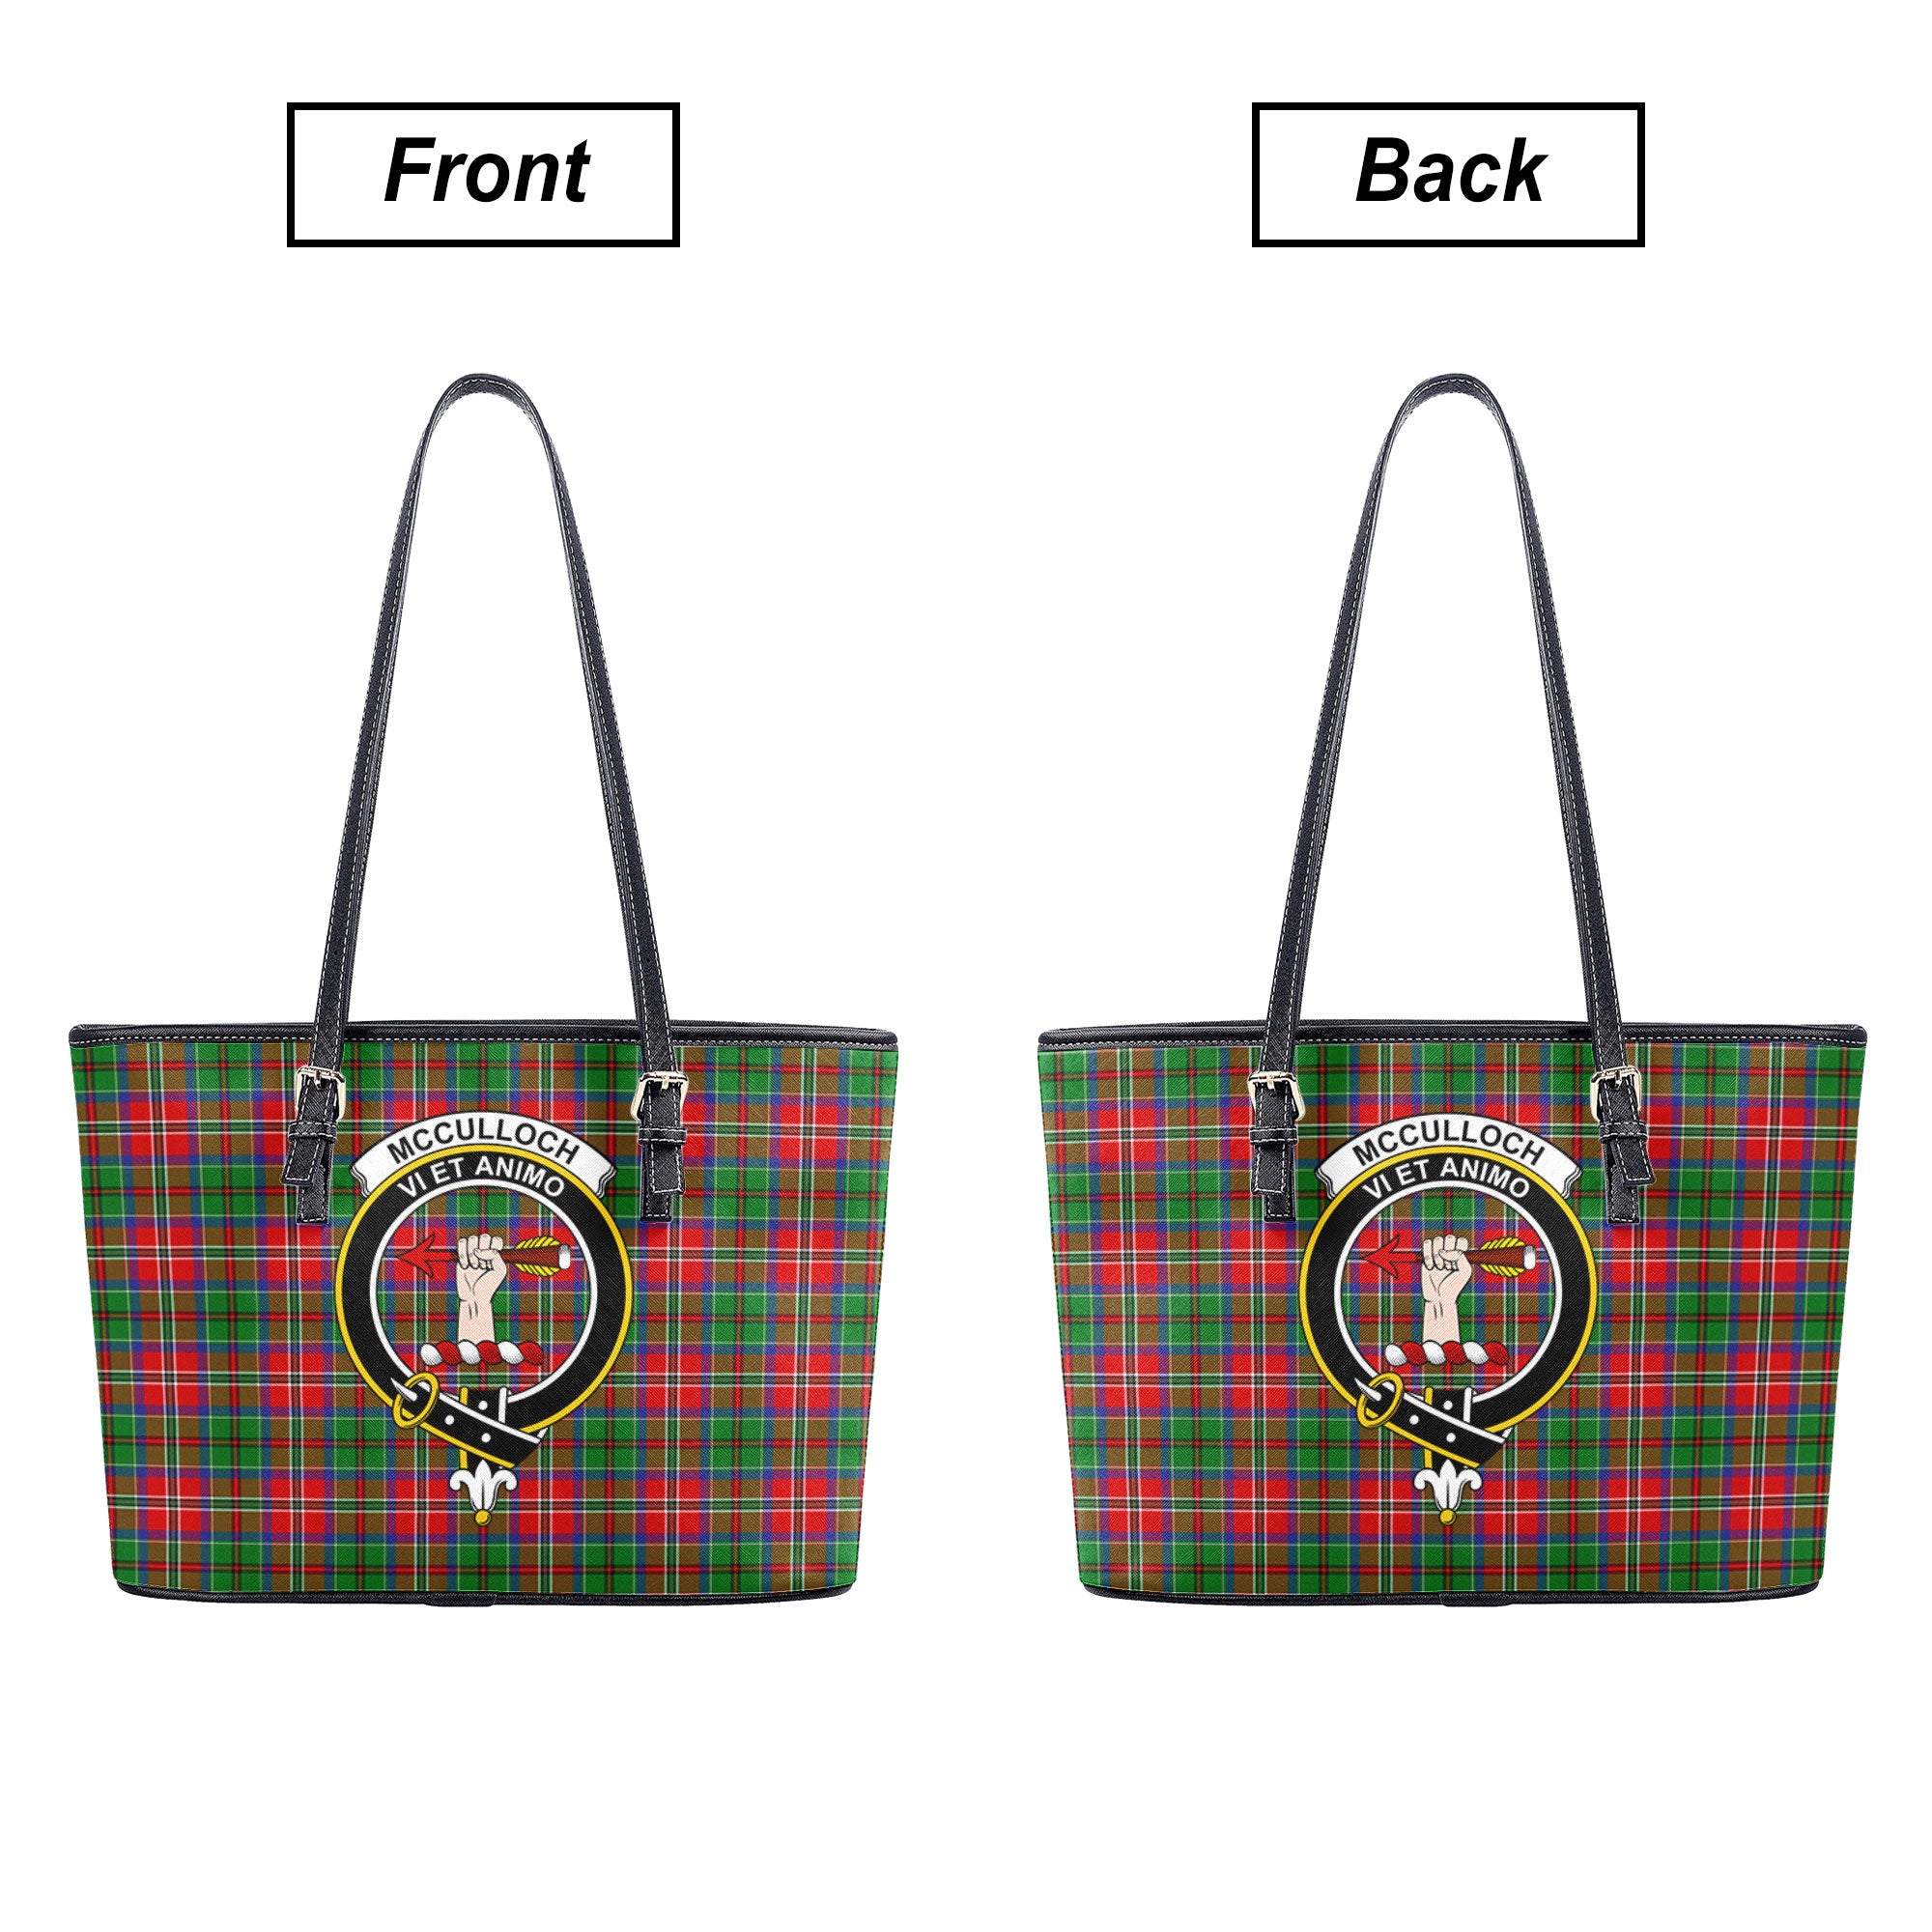 McCulloch Tartan Crest Leather Tote Bag